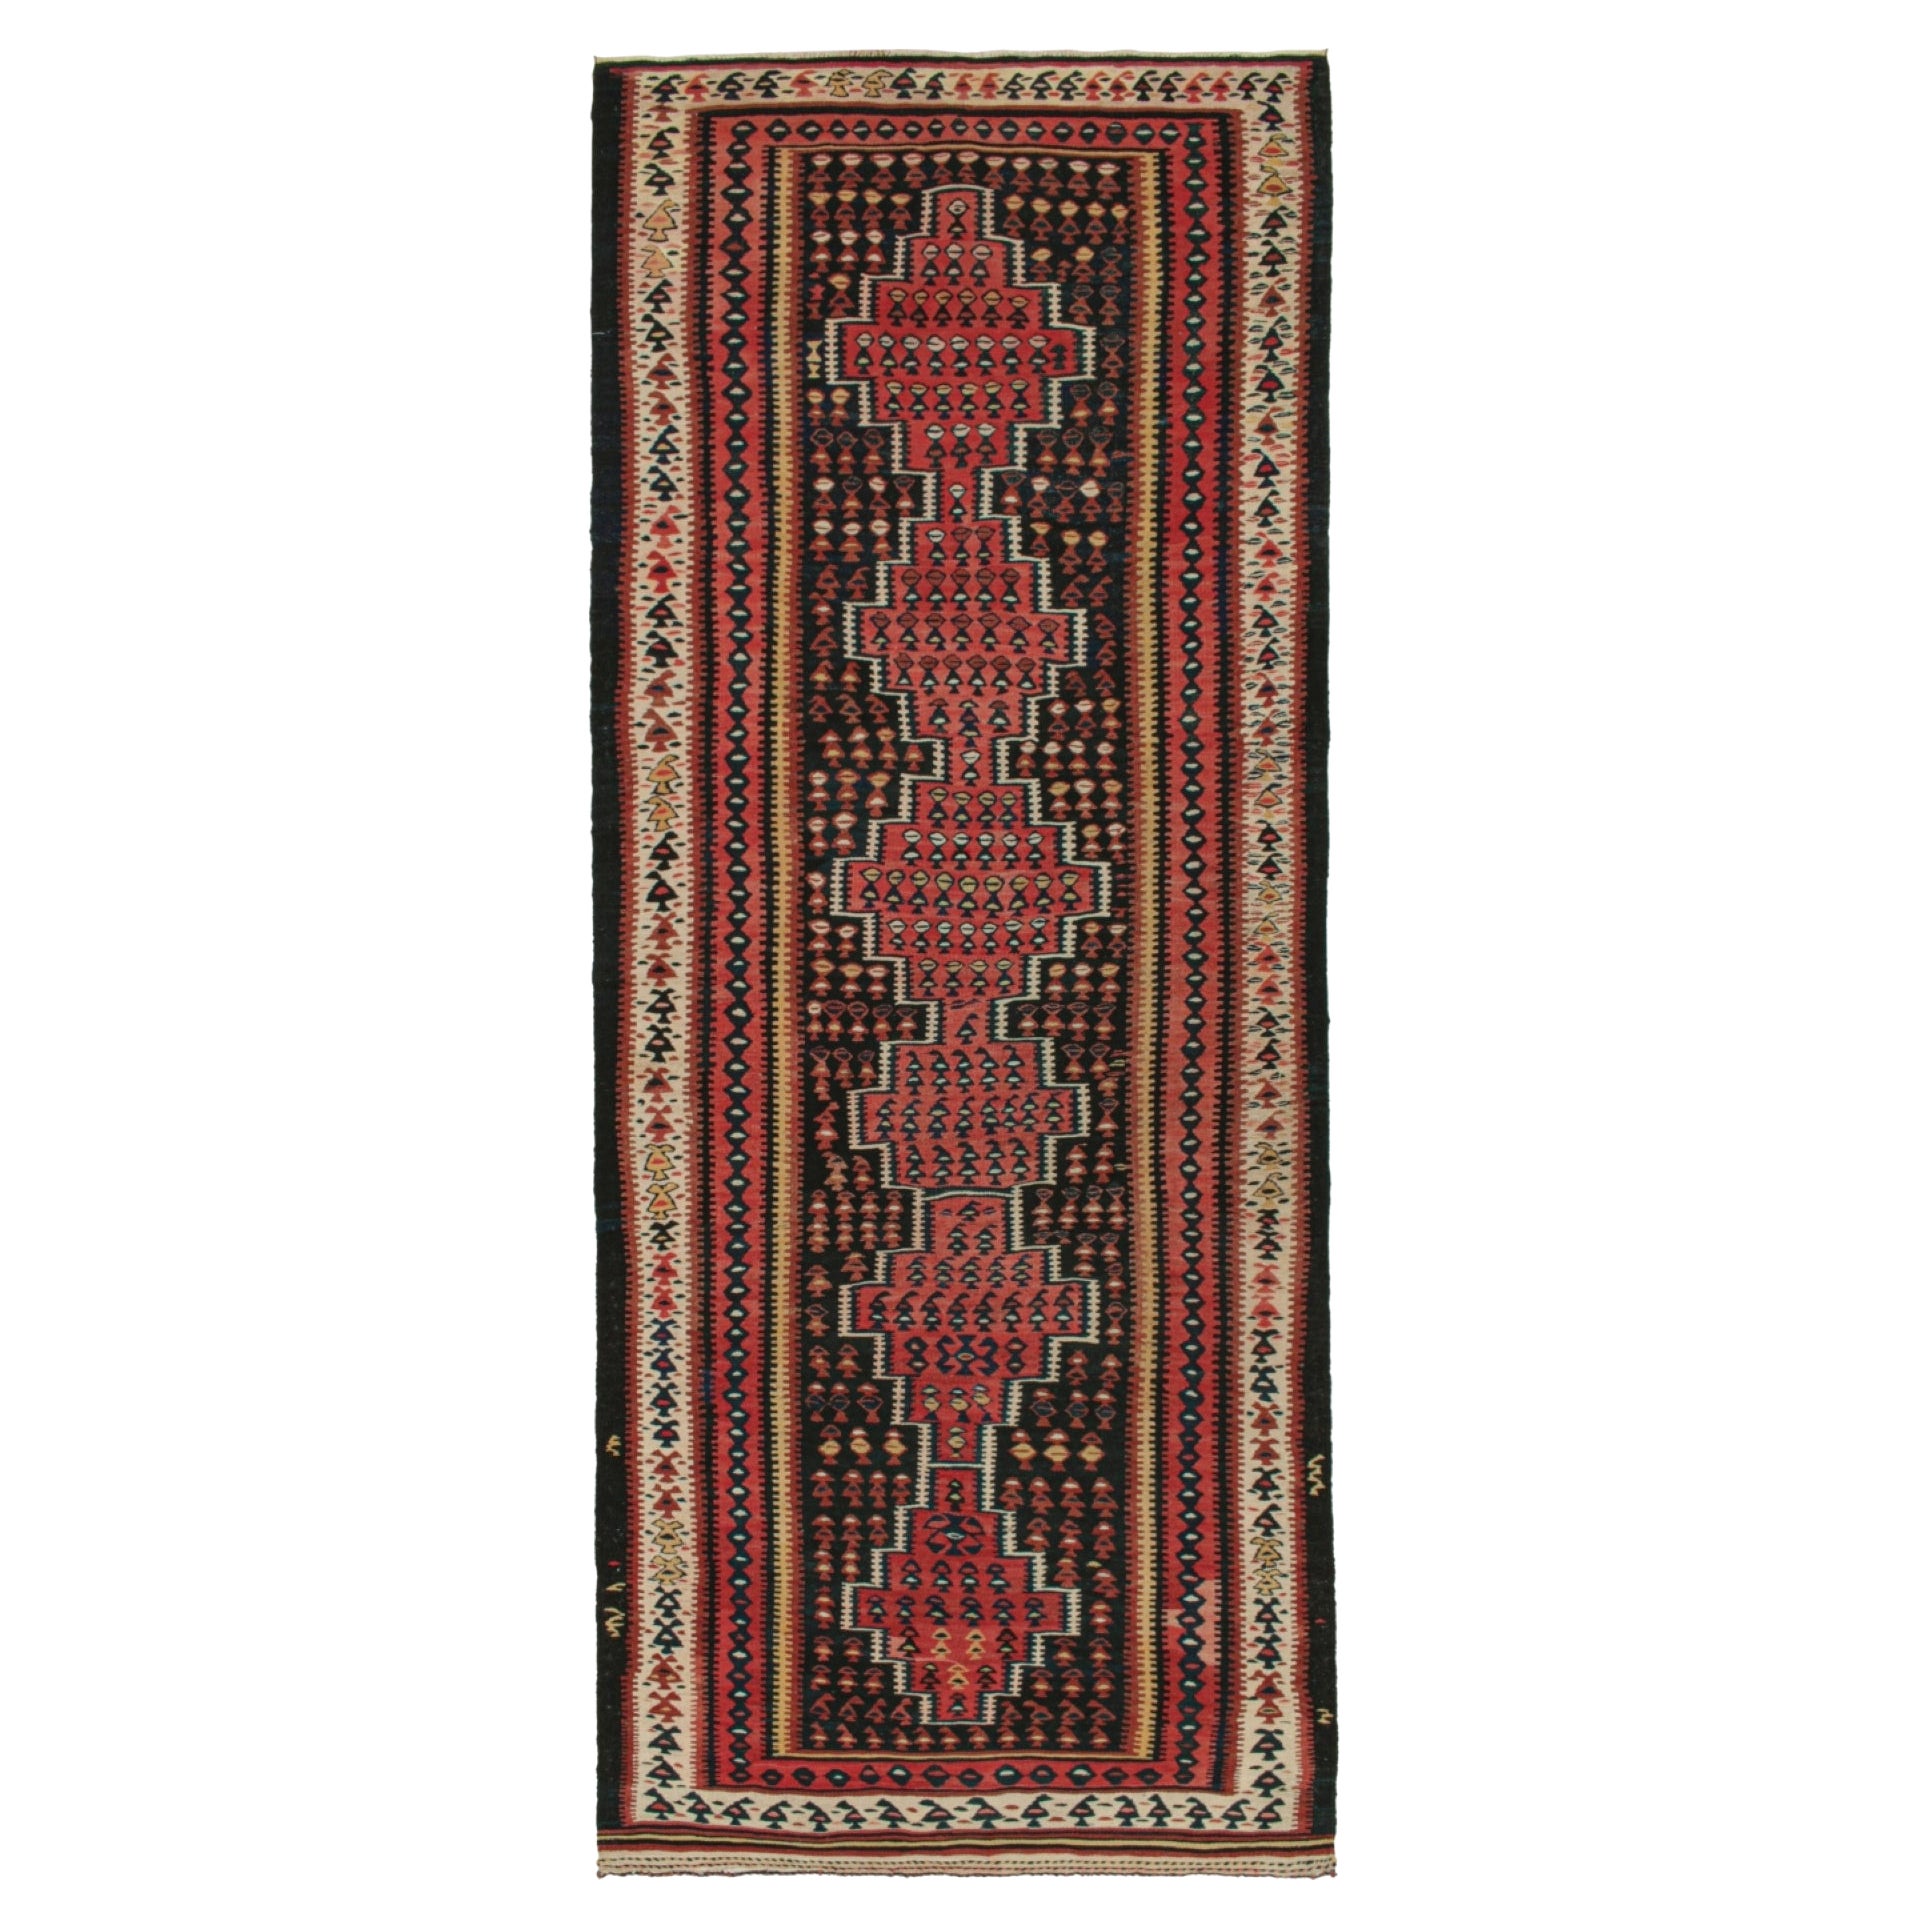 Vintage Persian Kilim in Black and Red with Geometric Patterns